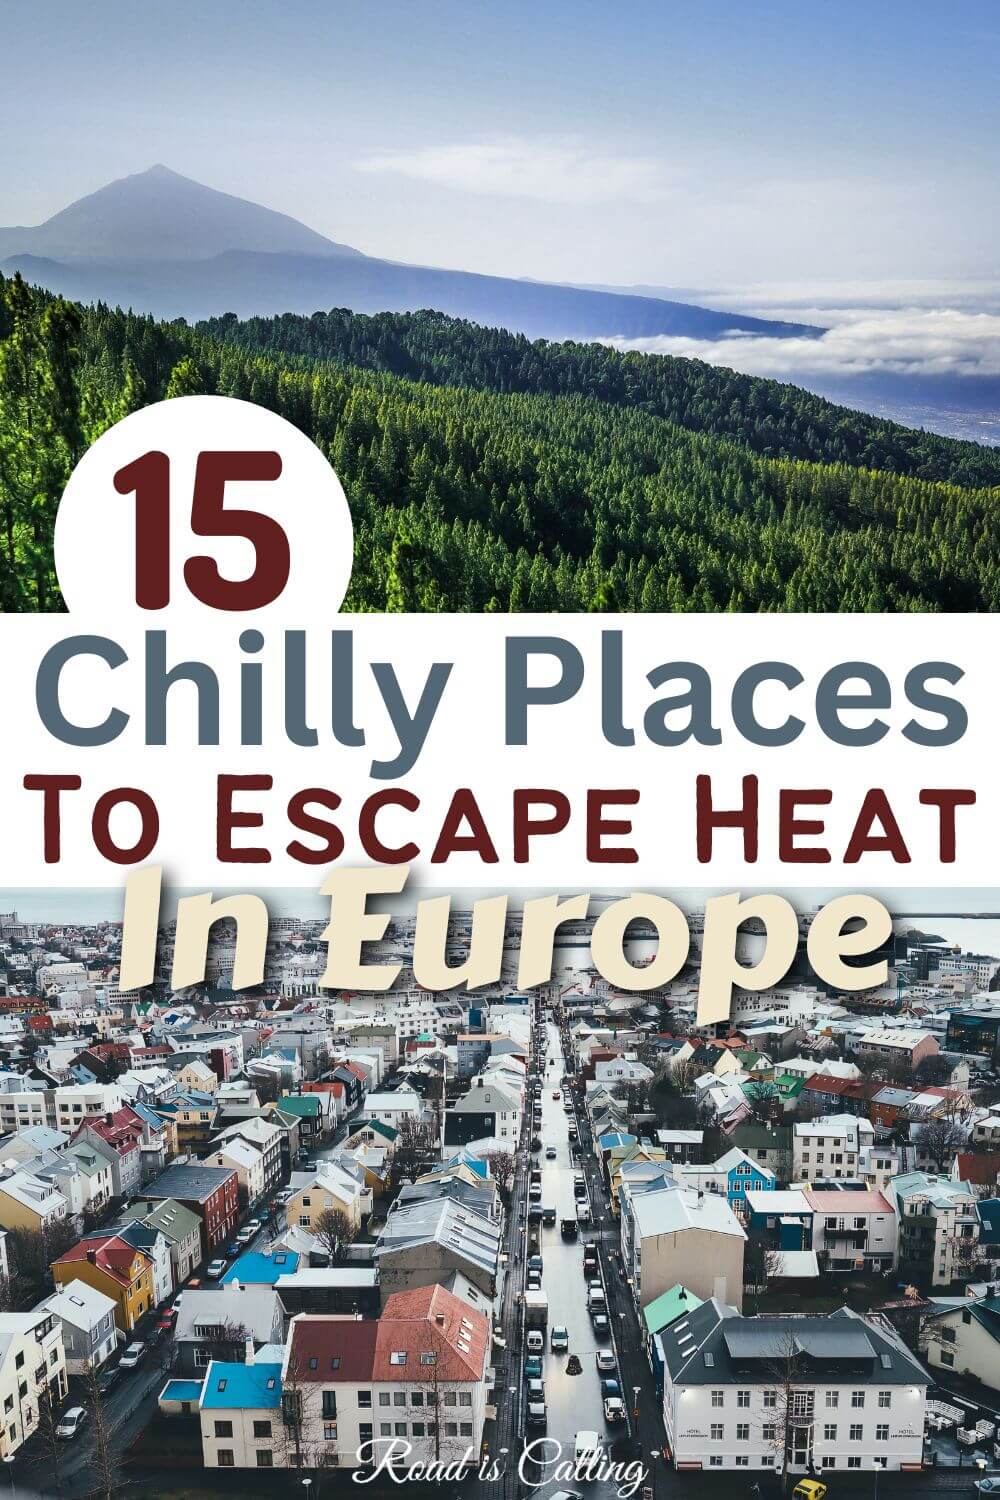 Chilly places to escape hear in Europe